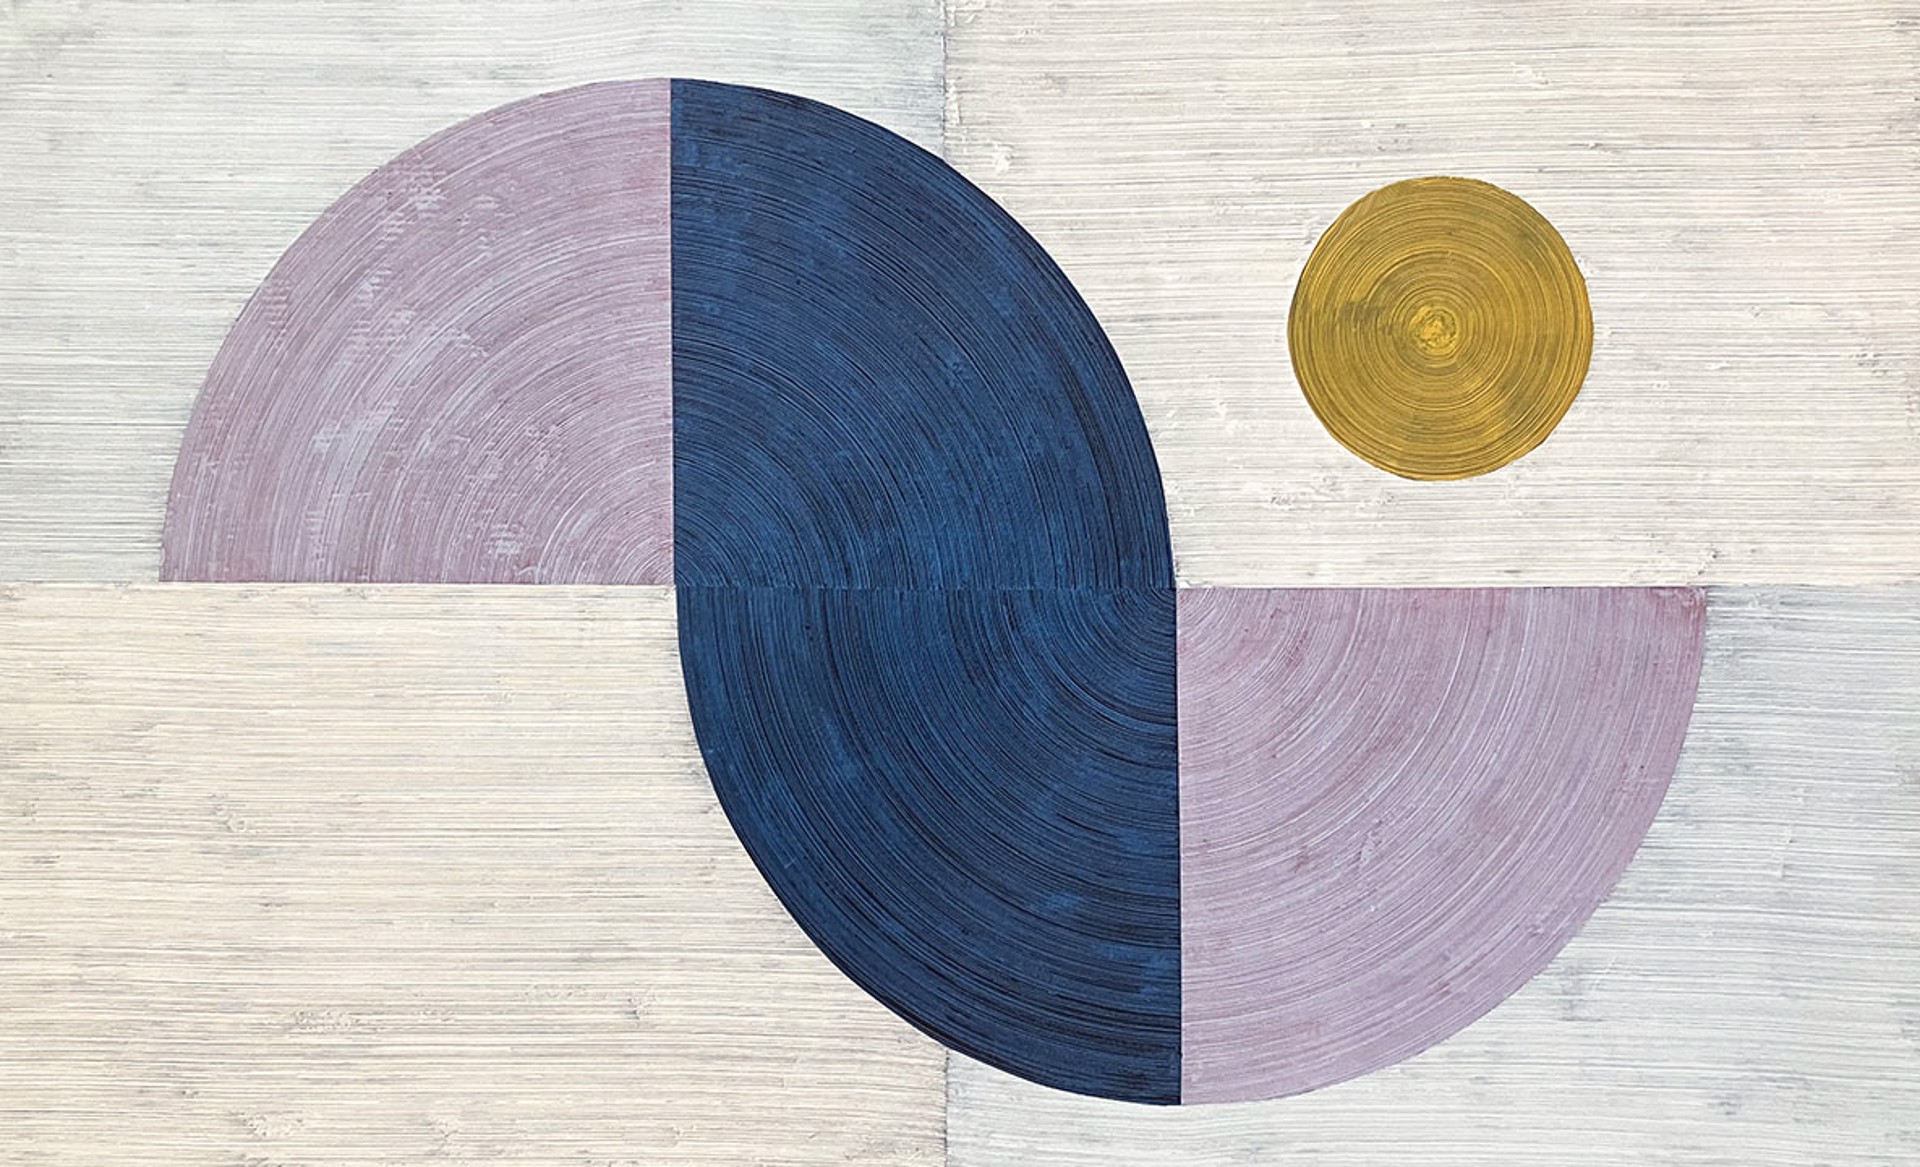 A Harmonia painting with a yellow, blue, and purple circle by David Skillicorn.